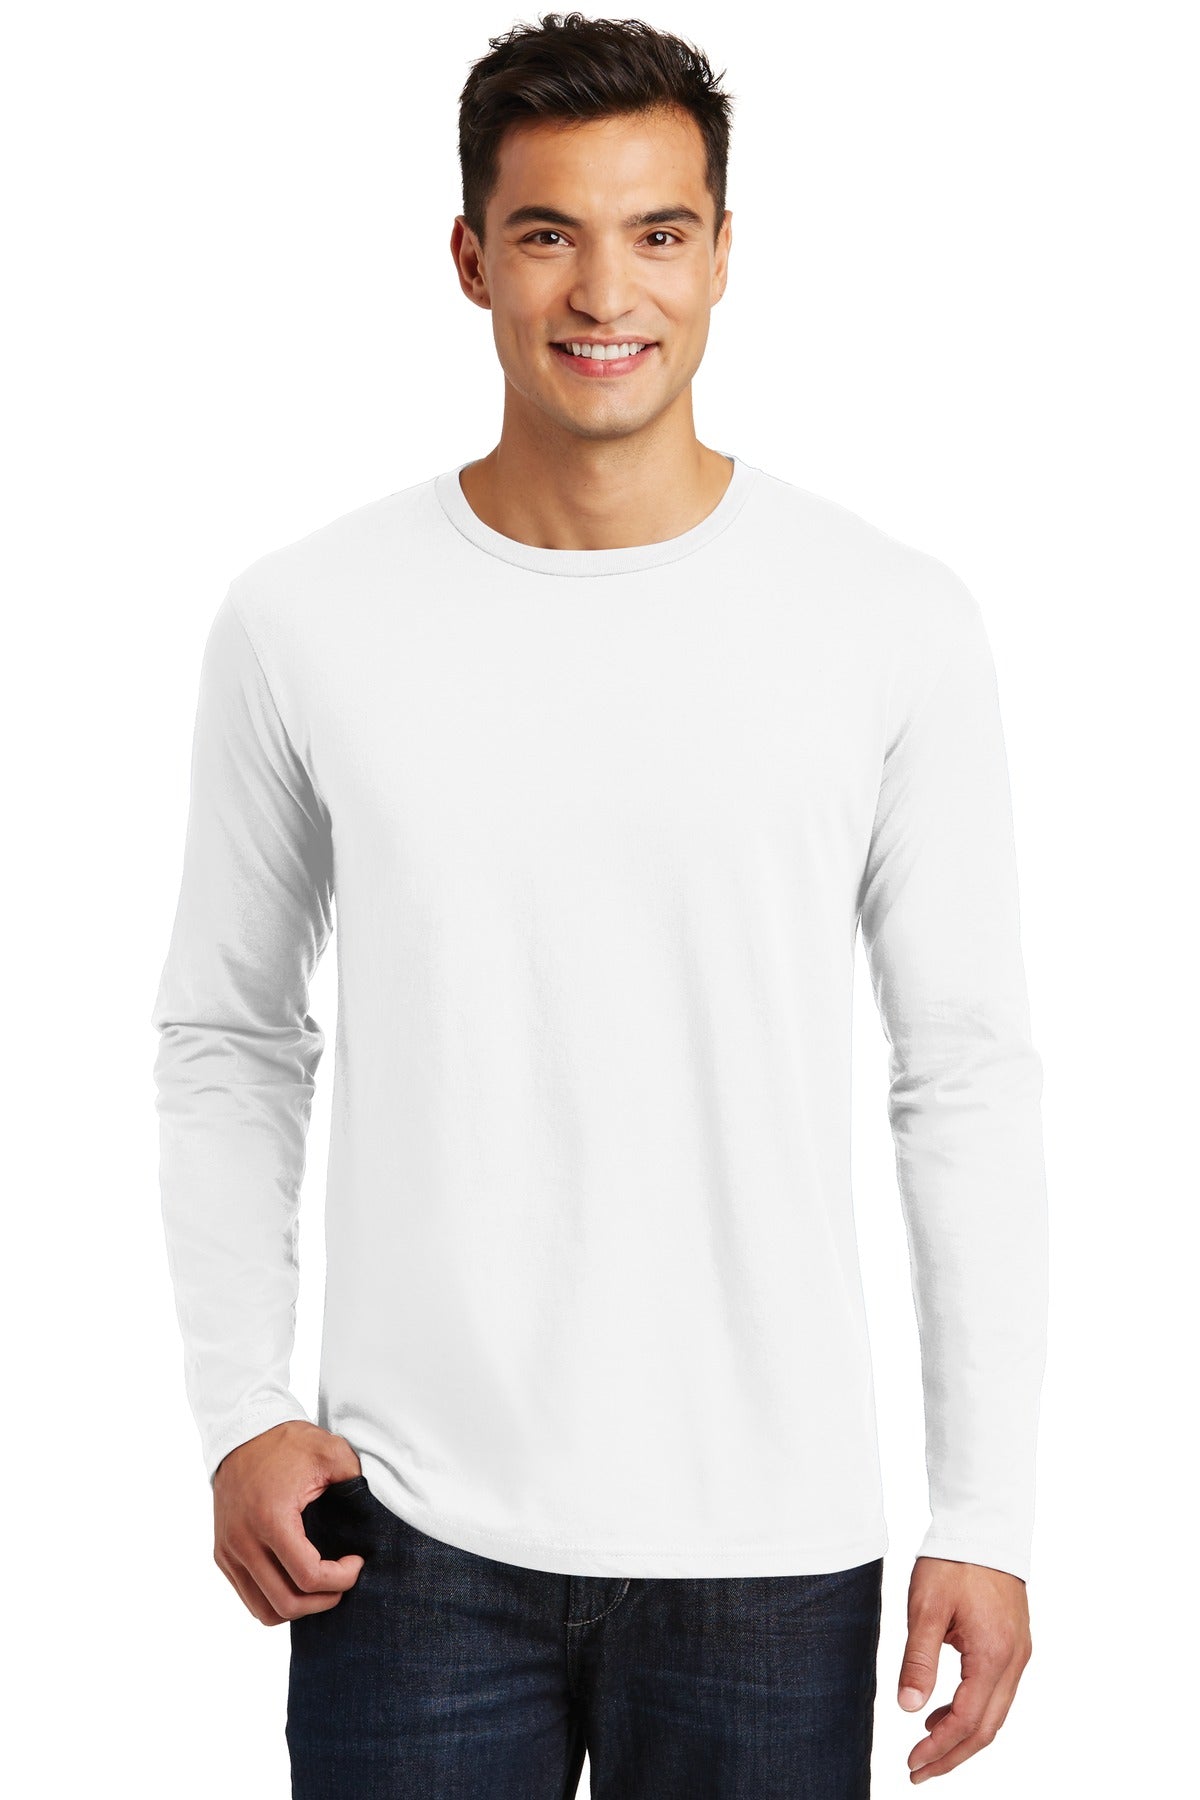 District ® Perfect Weight® Long Sleeve Tee. DT105